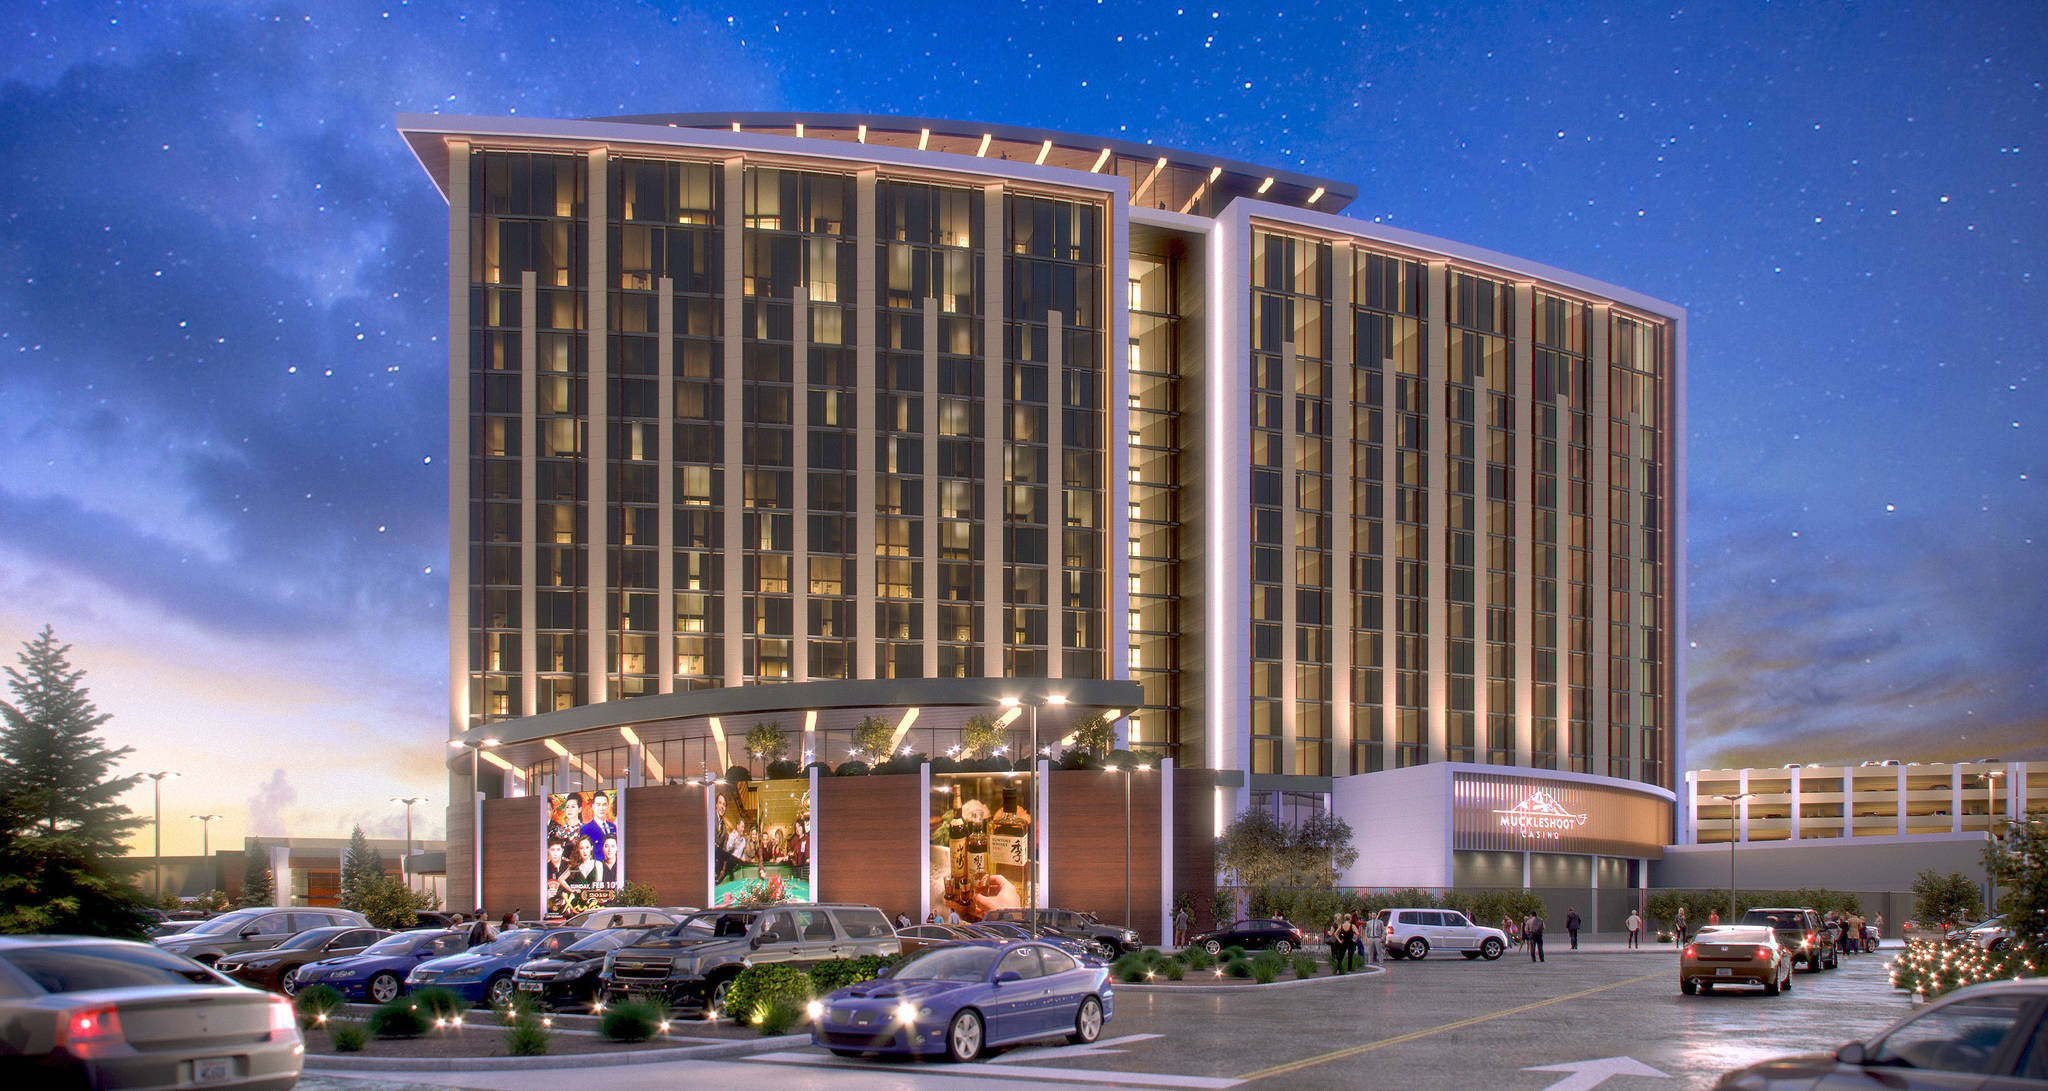 A rendering of what the Muckleshoot Indian Tribe’s new 18-story, 400-room hotel resort will look like when it is expected to open in 2021, next to its main casino in Auburn. COURTESY IMAGE, Tribe/Smarthouse Creative